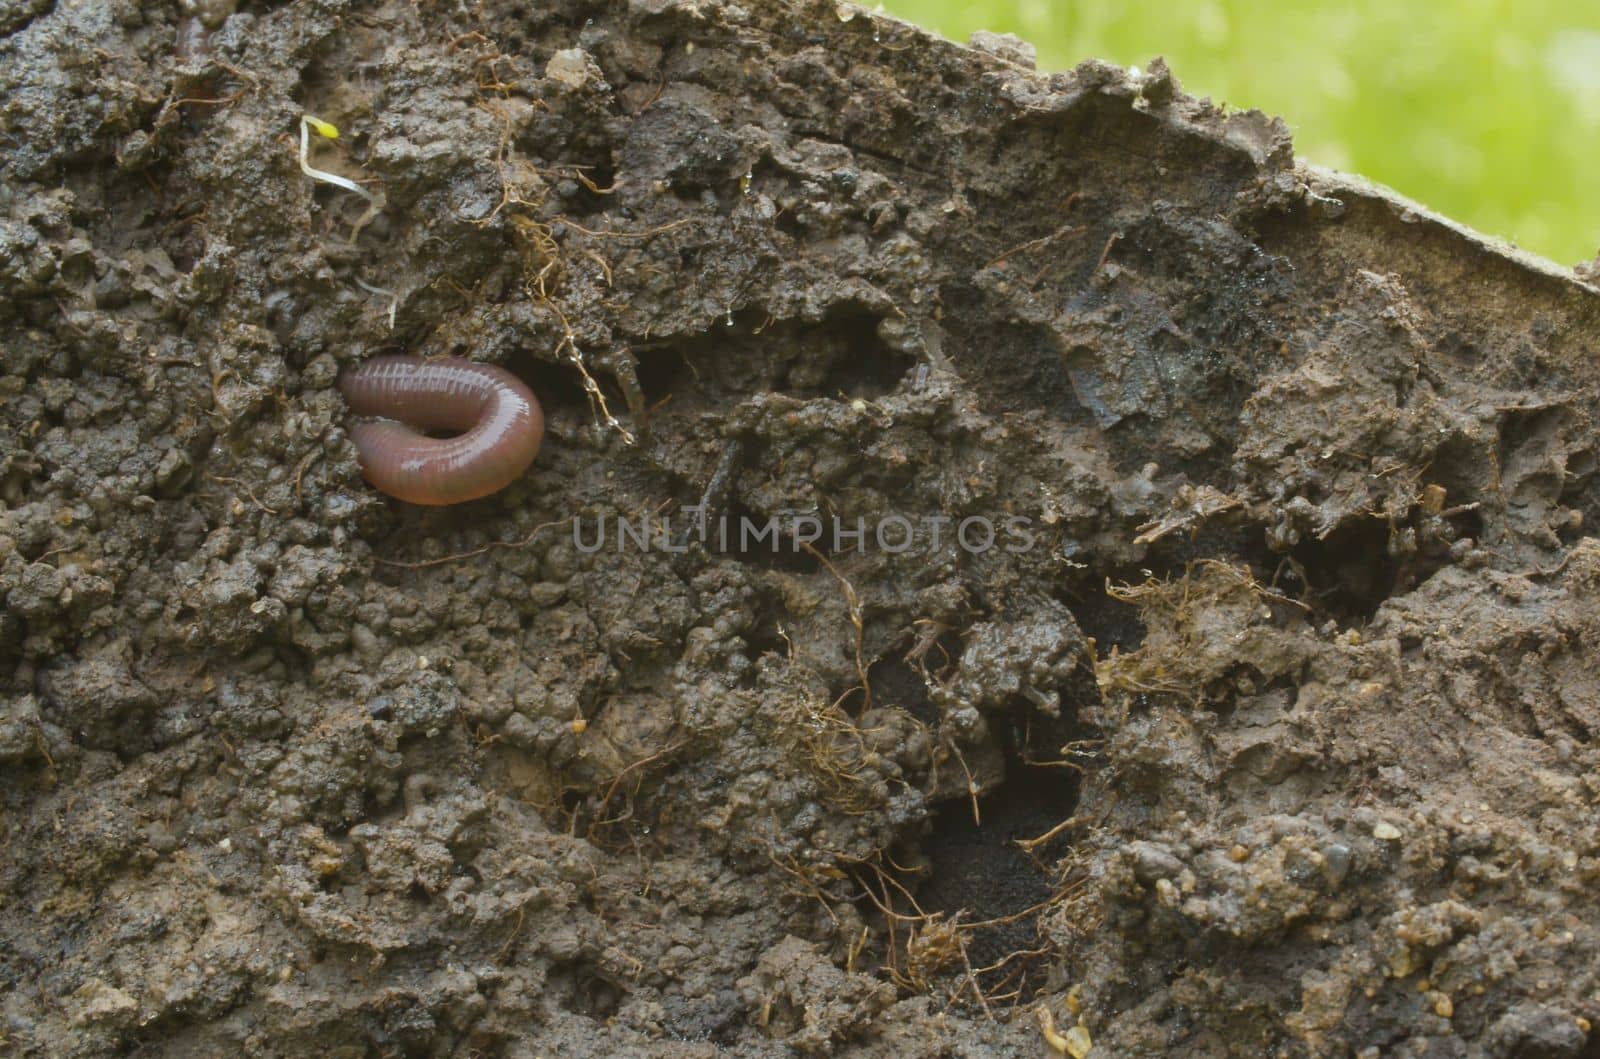 Worm crawling in freshly dug up soil. Earthworms close up. Invertebrate life.